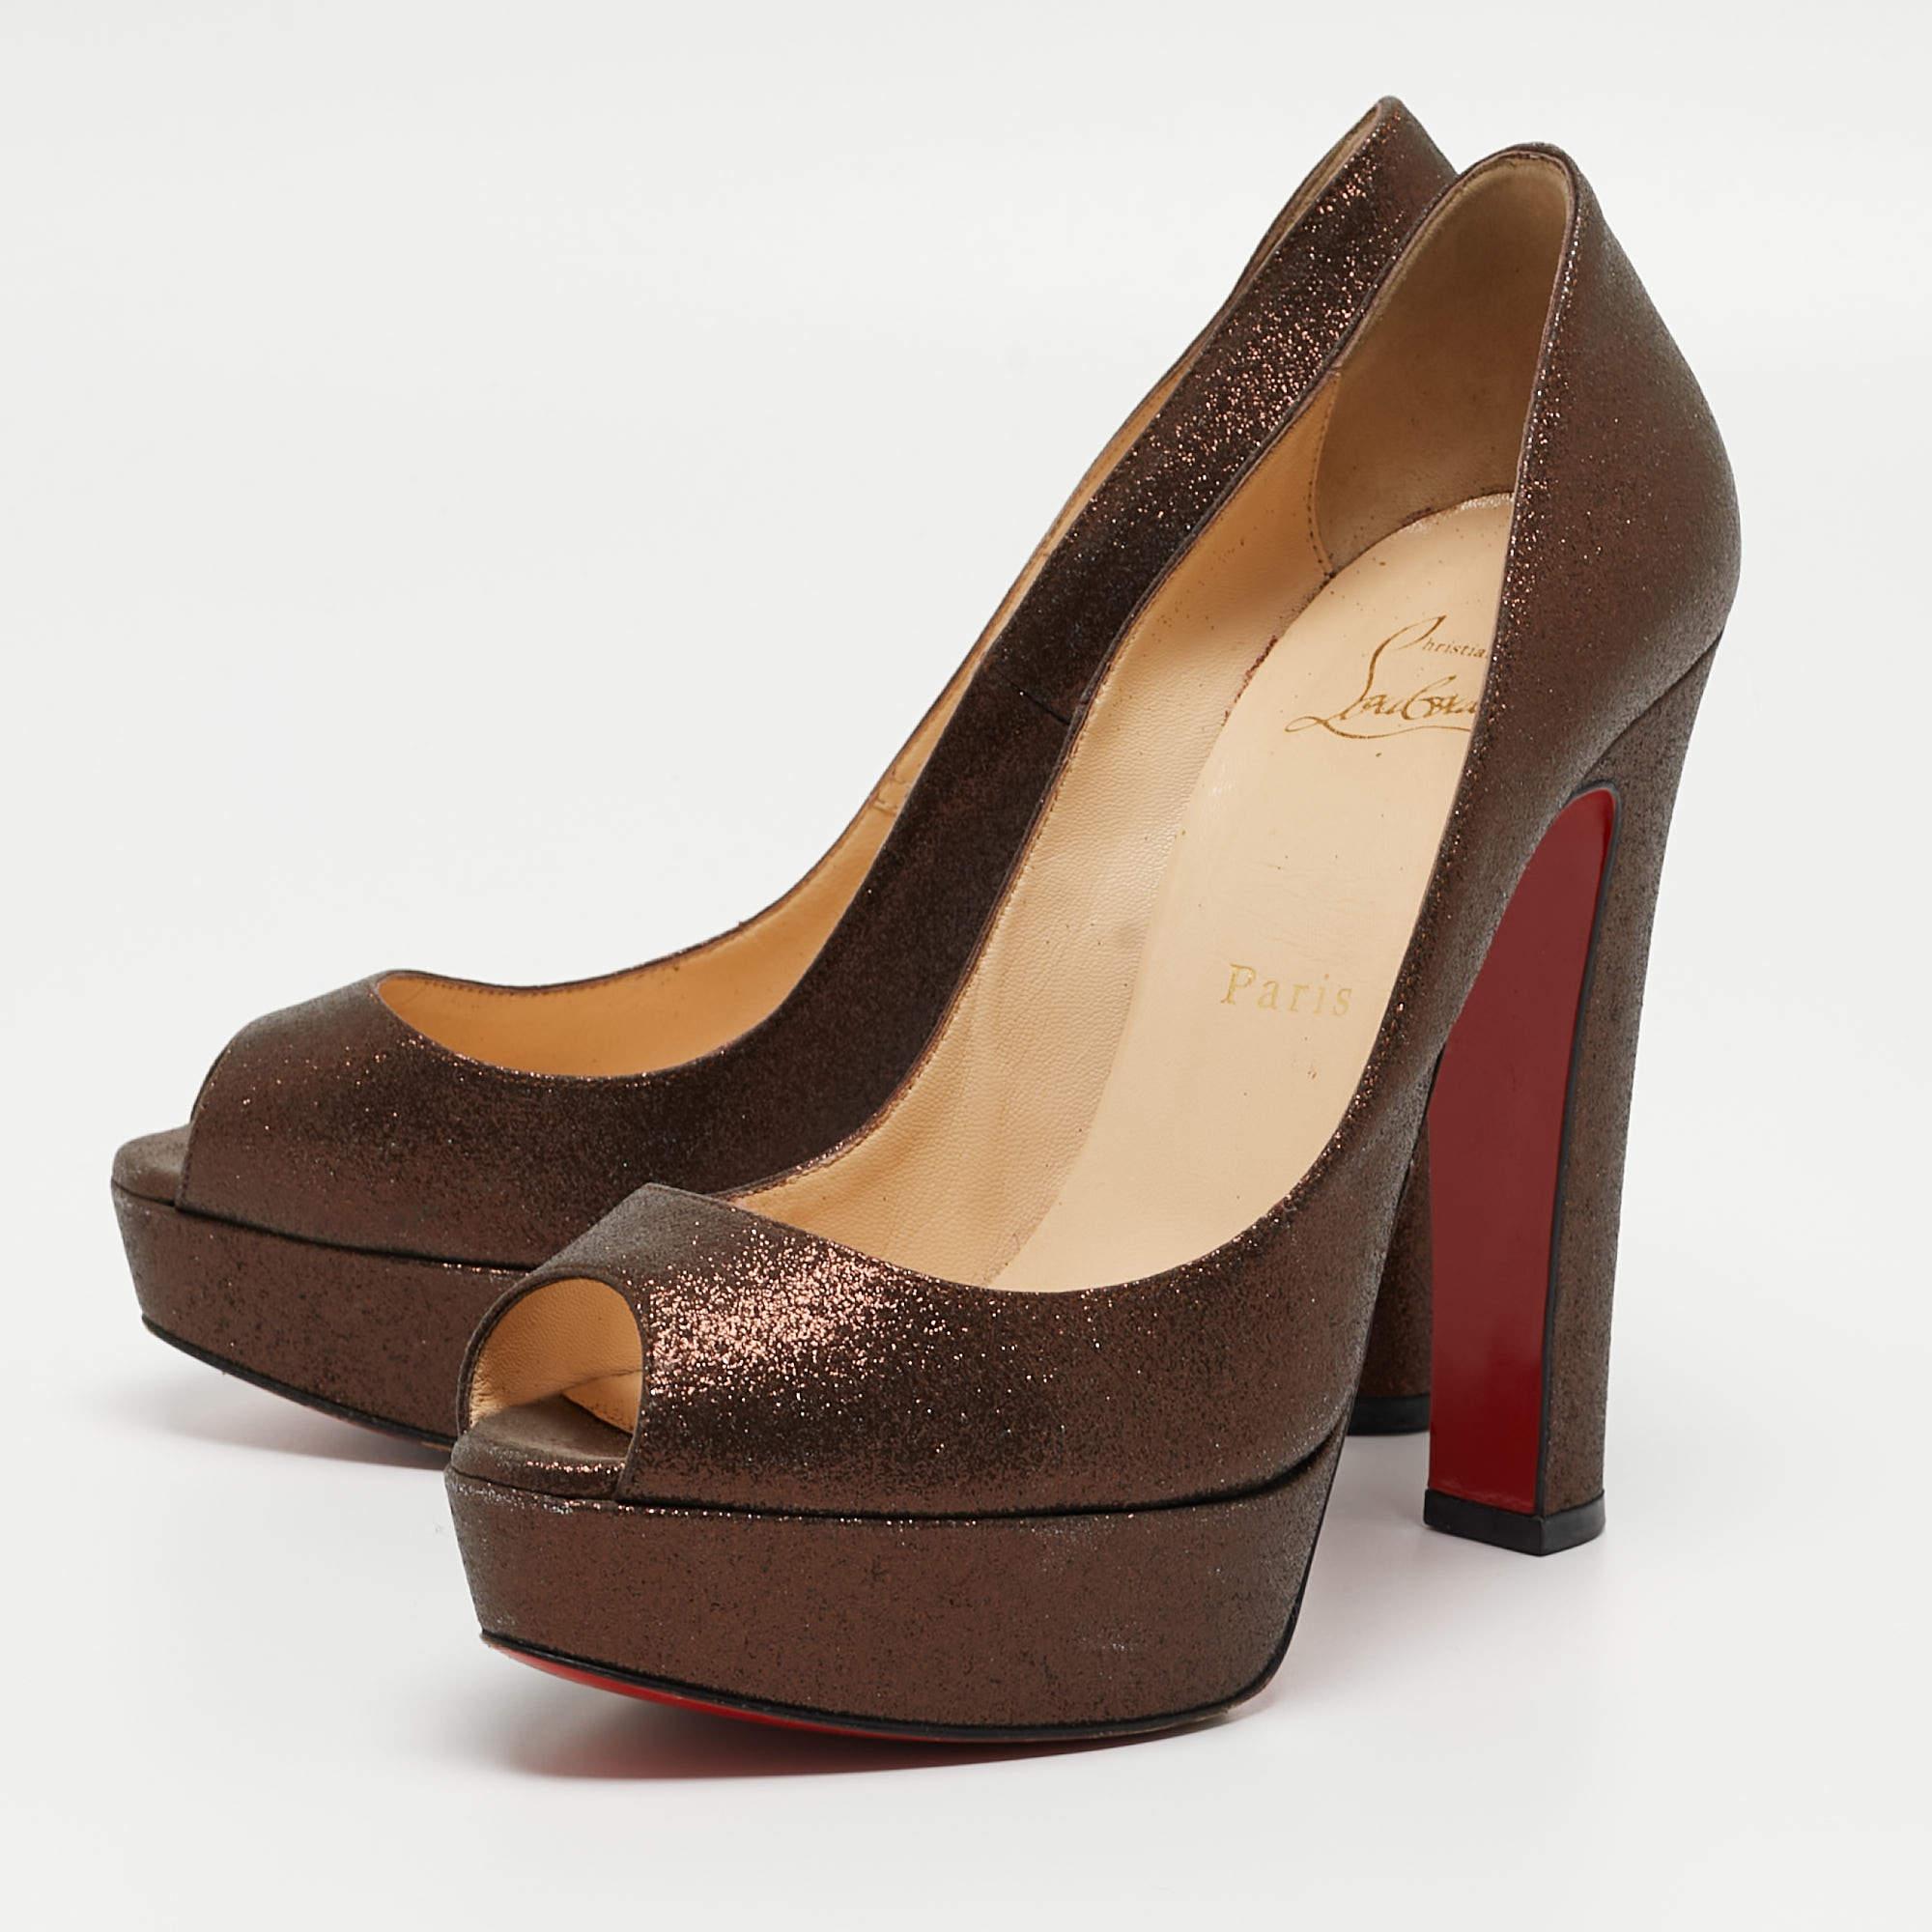 These pumps from Christian Louboutin are meant to be a loved choice. Wonderfully crafted and balanced on block heels, the pumps will lift your feet in a stunning silhouette.

